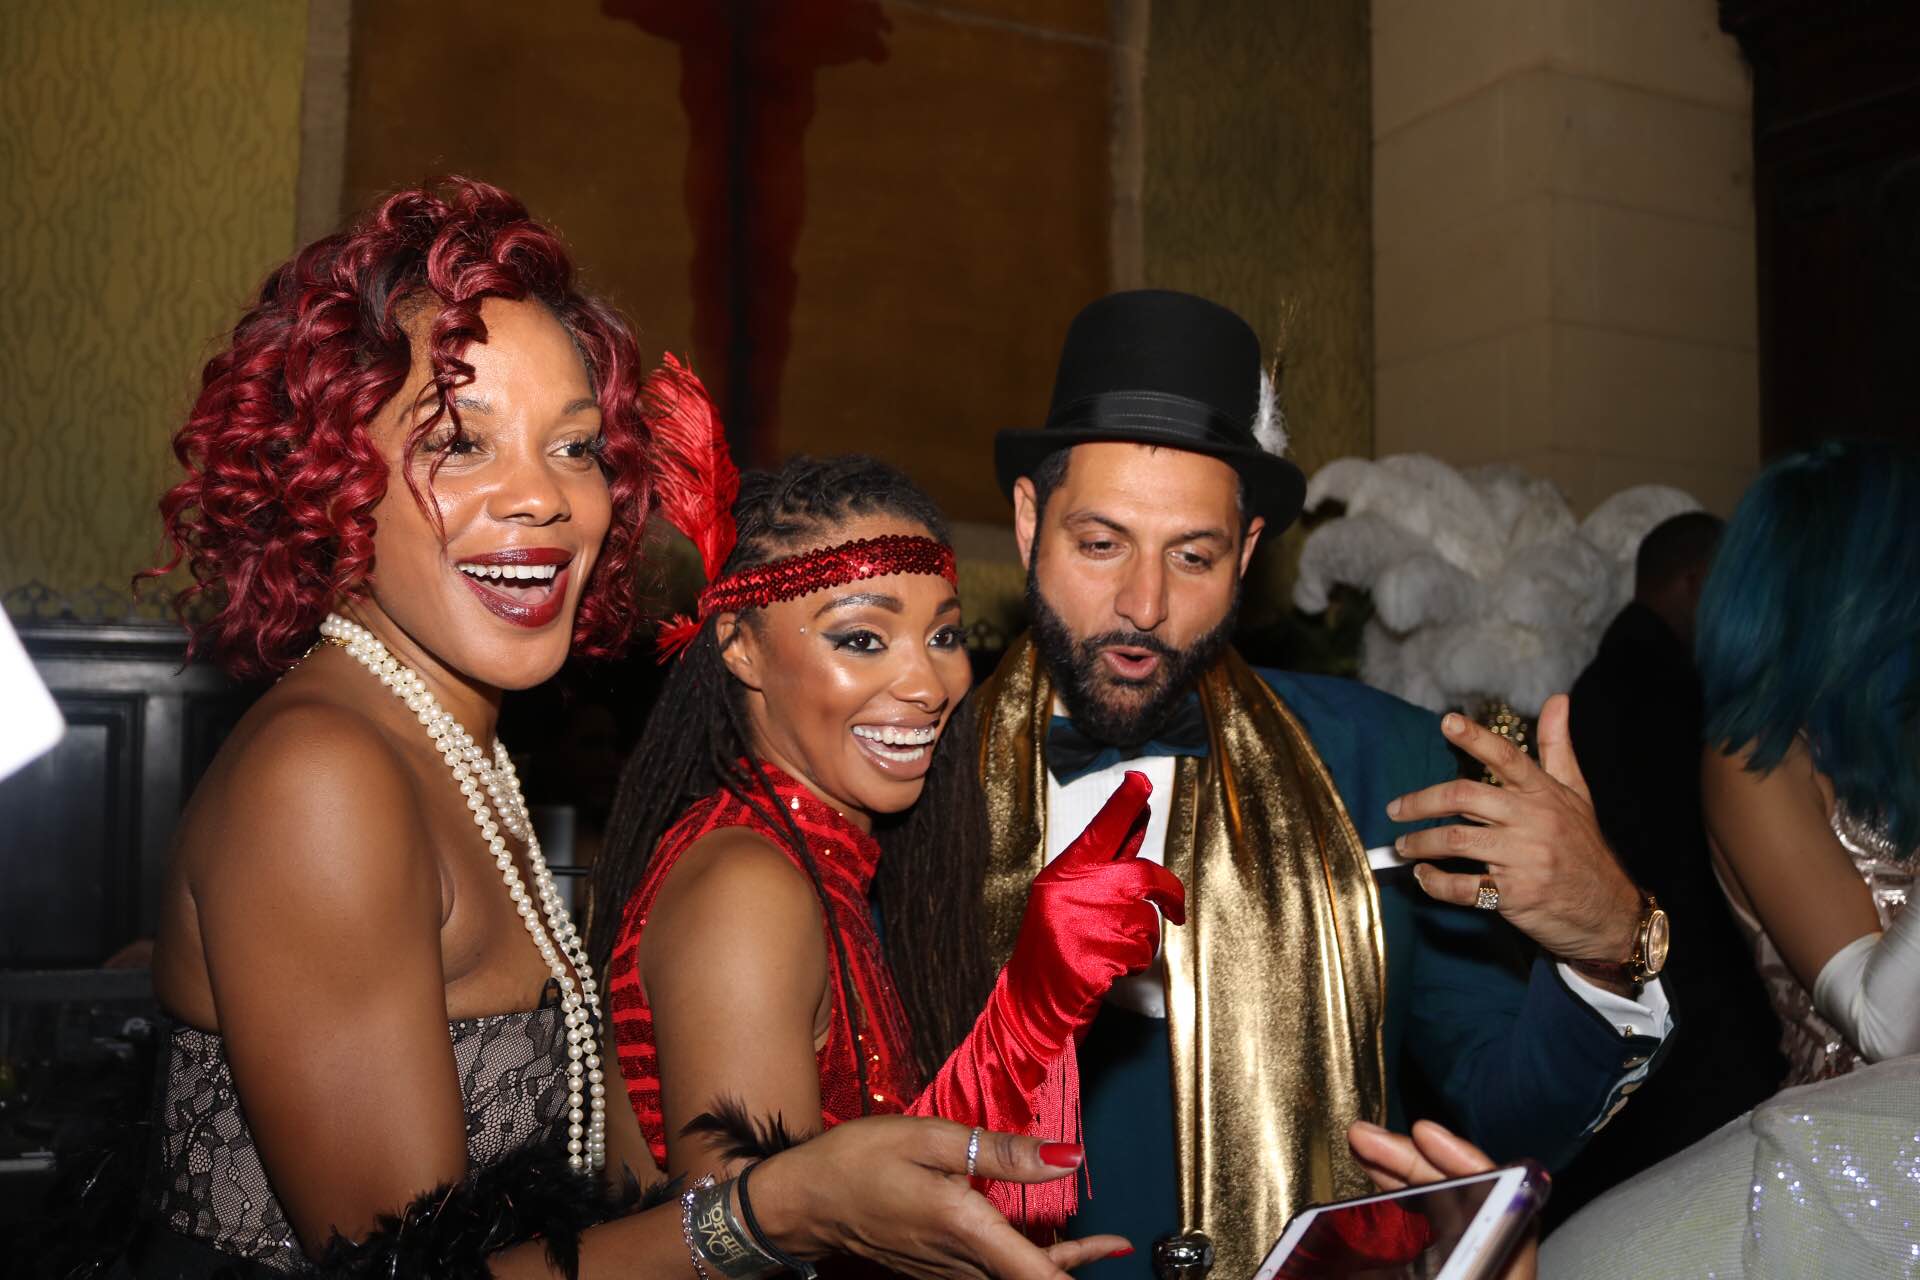 IMG 5416 - Event Recap: Great Gatsby Birthday Affair with Mimi Faust and Sandy Lal @MimiFaust @sandylal